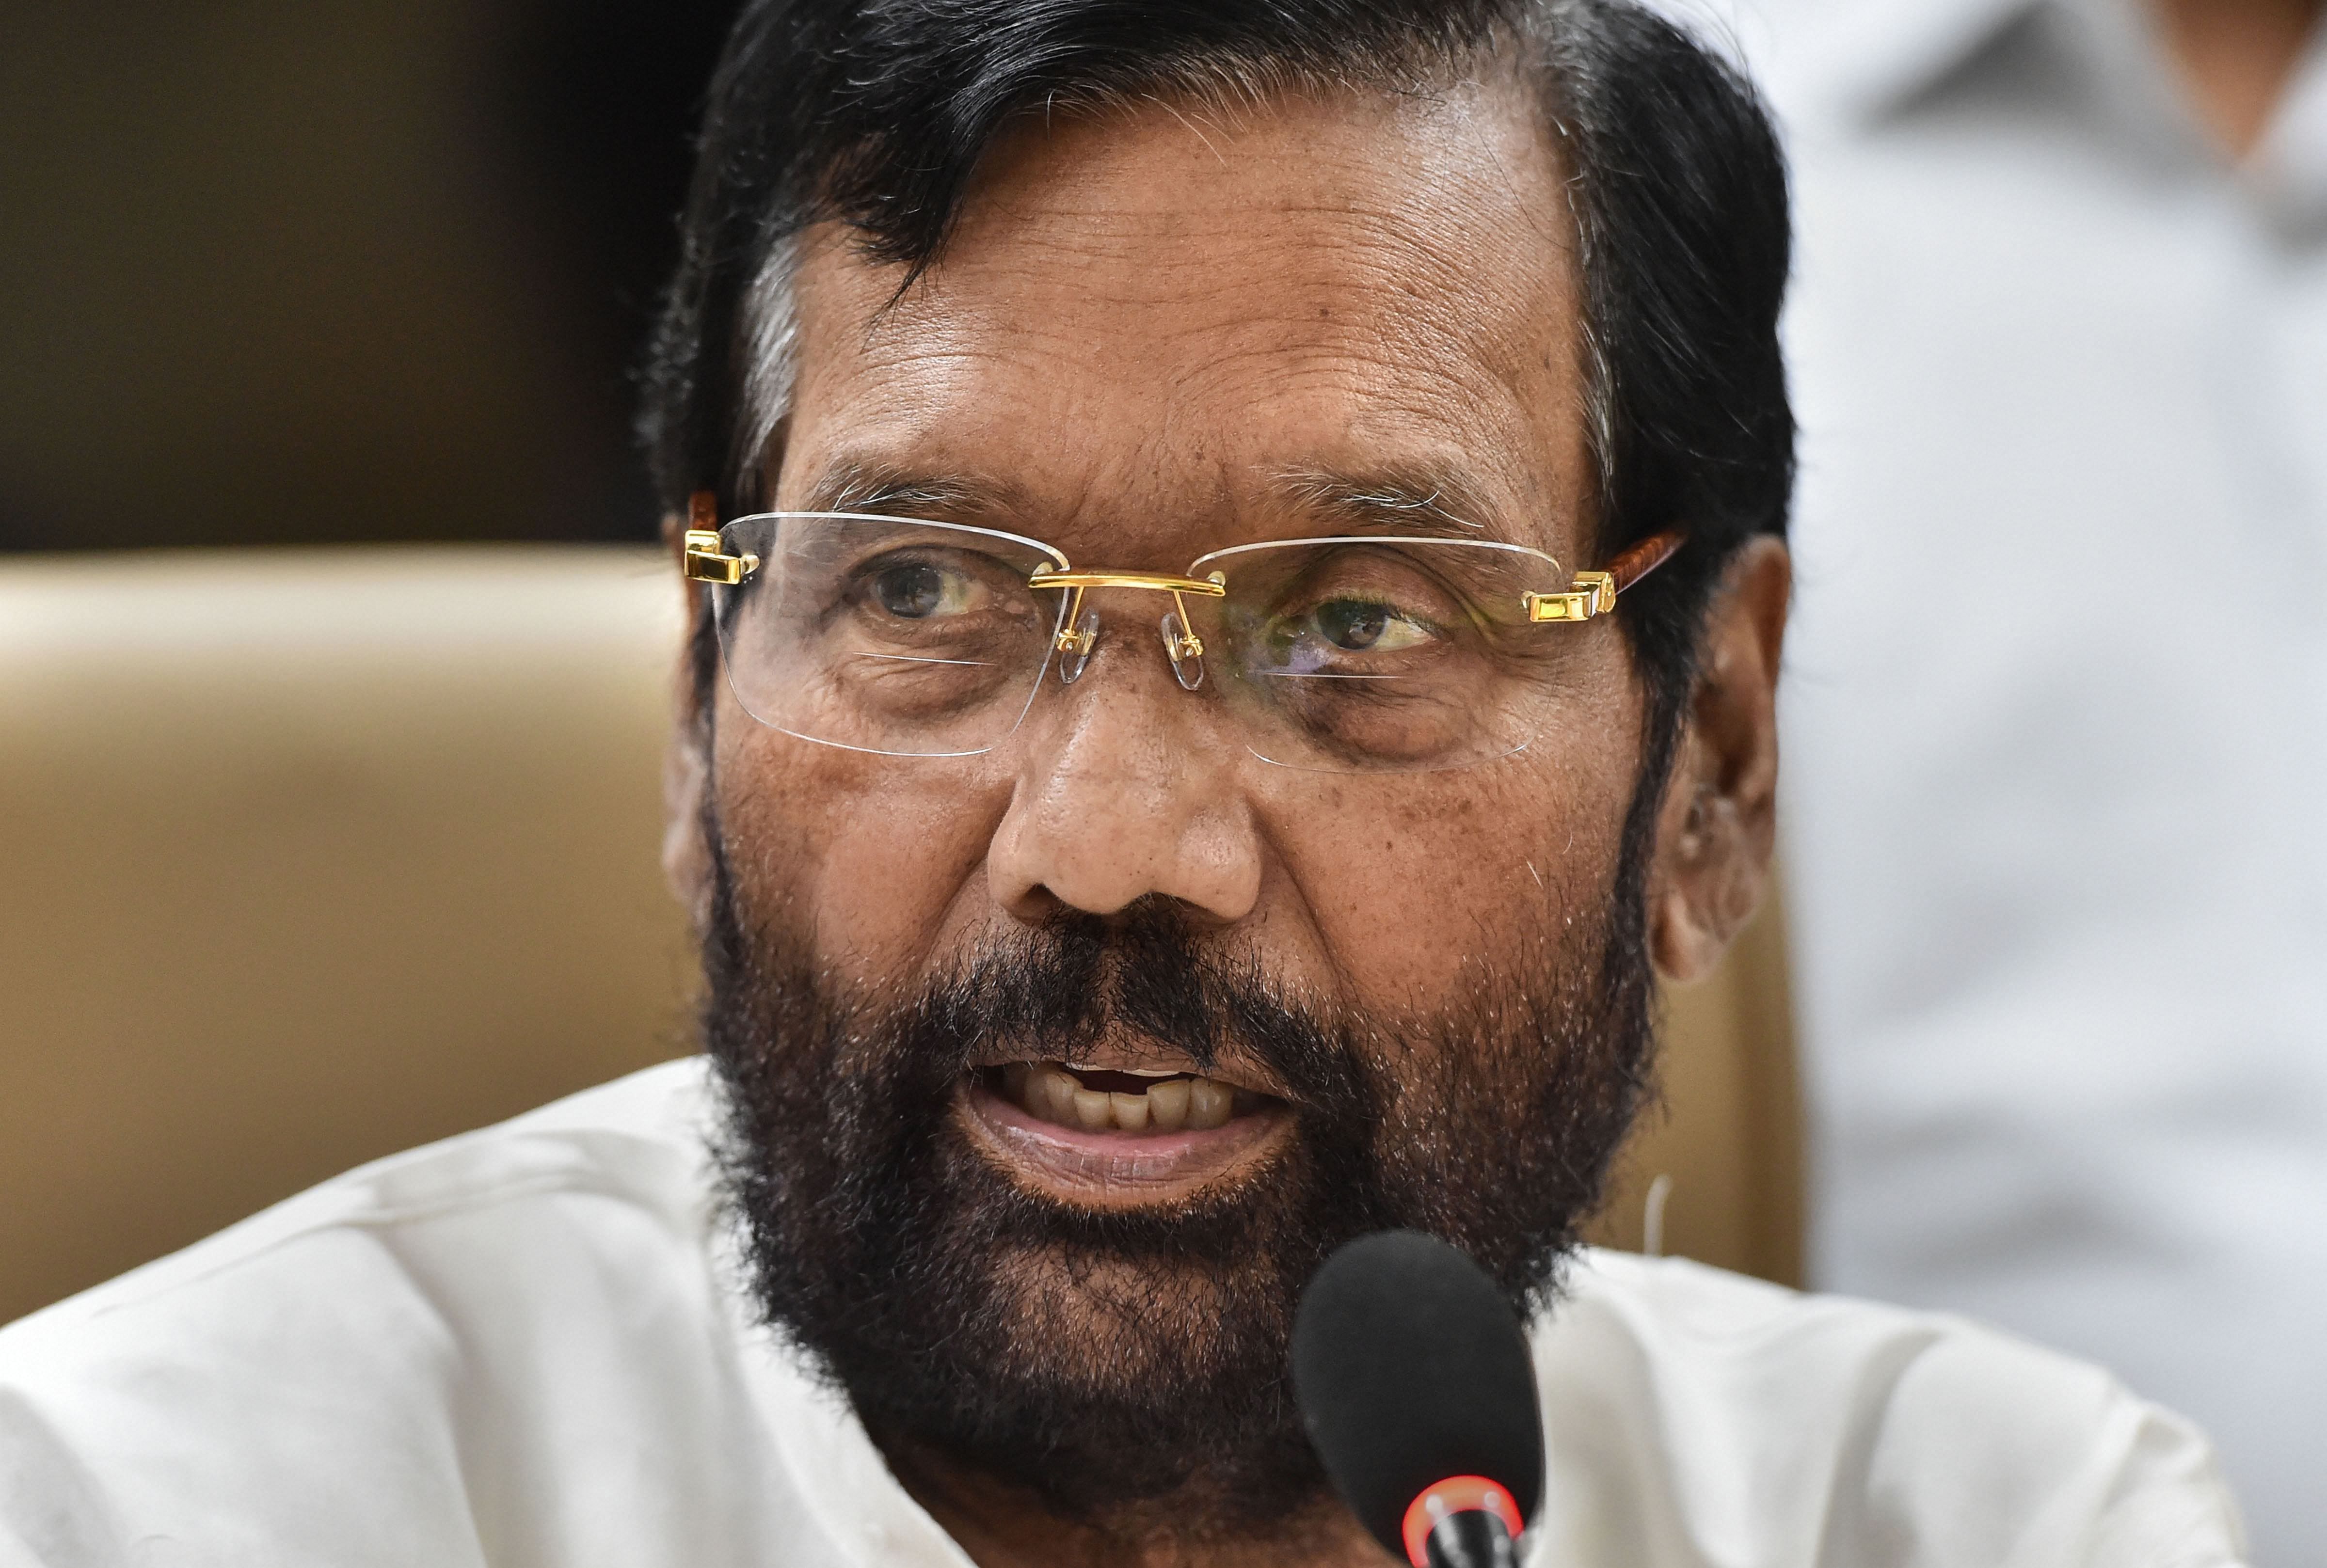 There is no challenge in Bihar and the NDA will form the government after getting two-thirds majority in the assembly polls, Paswan said. (Credit: PTI Photo)